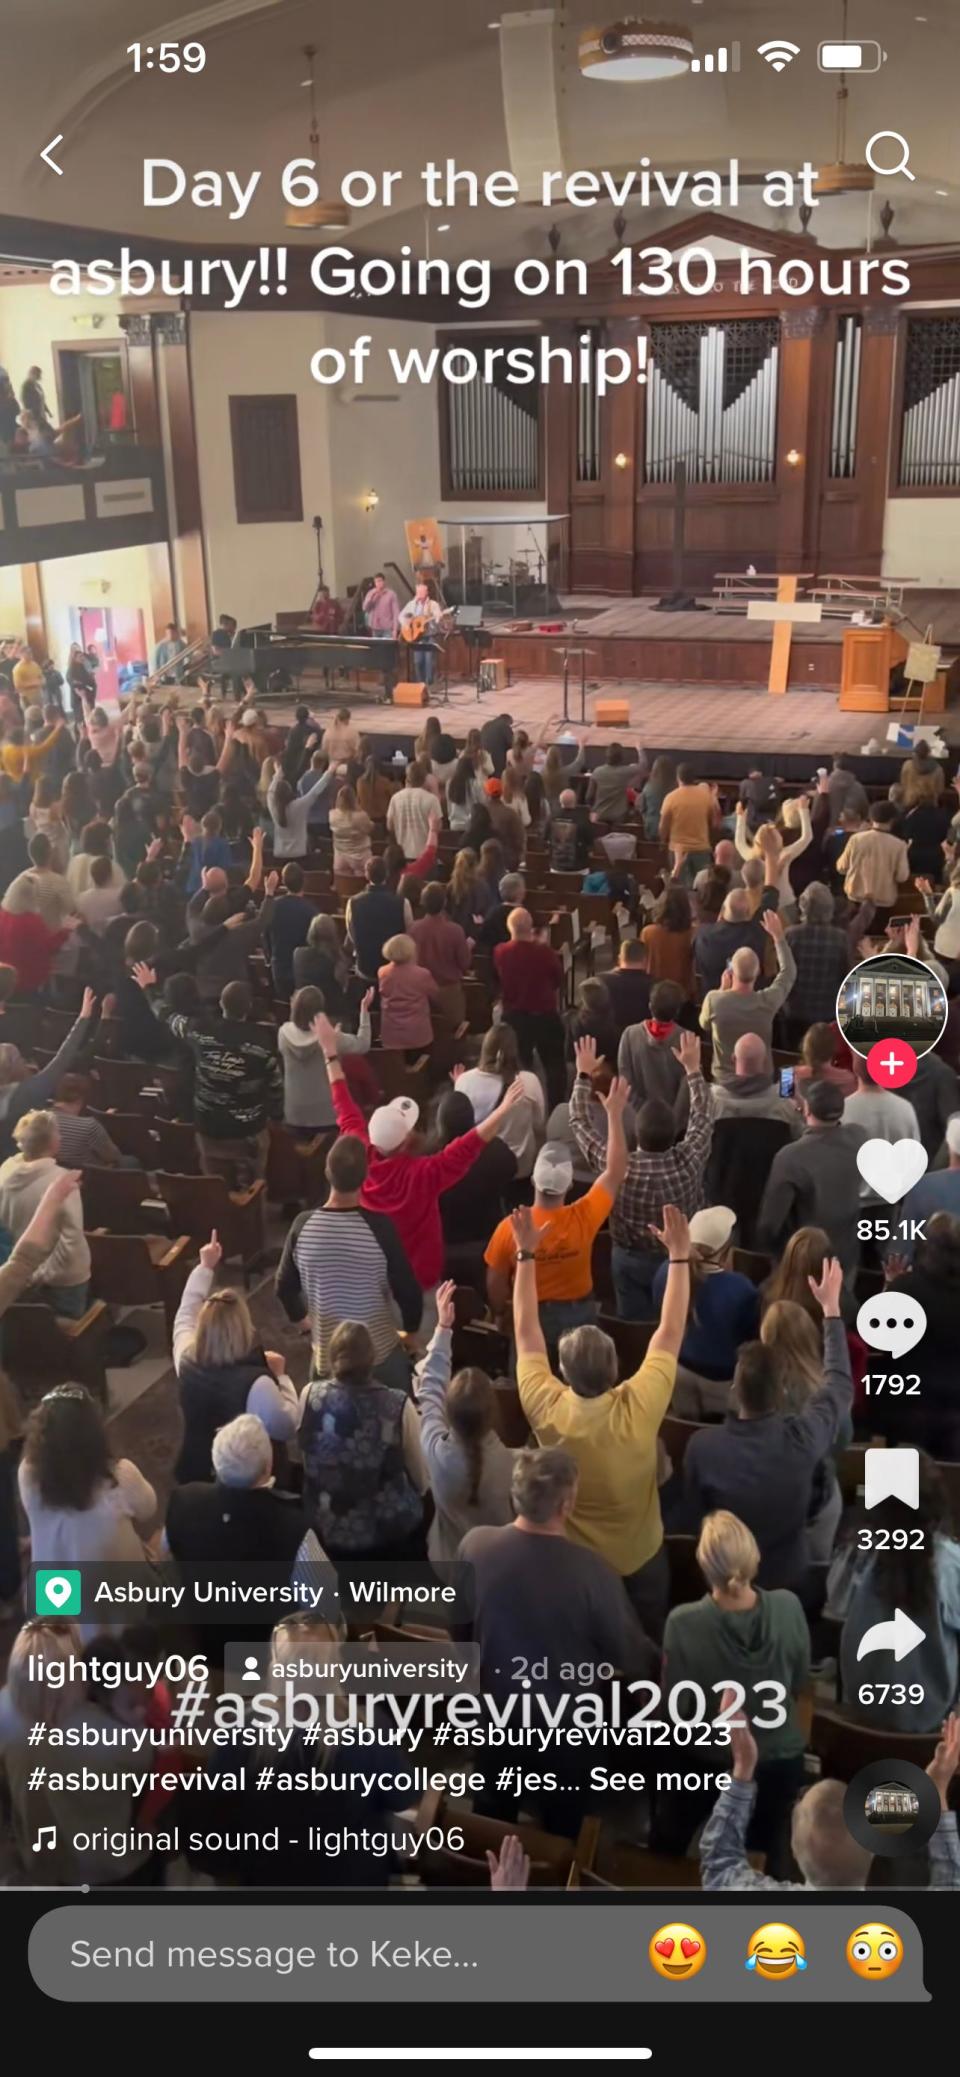 A religious revival at Asbury University in Wilmore, Kentucky, turned into a 144-hour wave of worship that drew thousands.